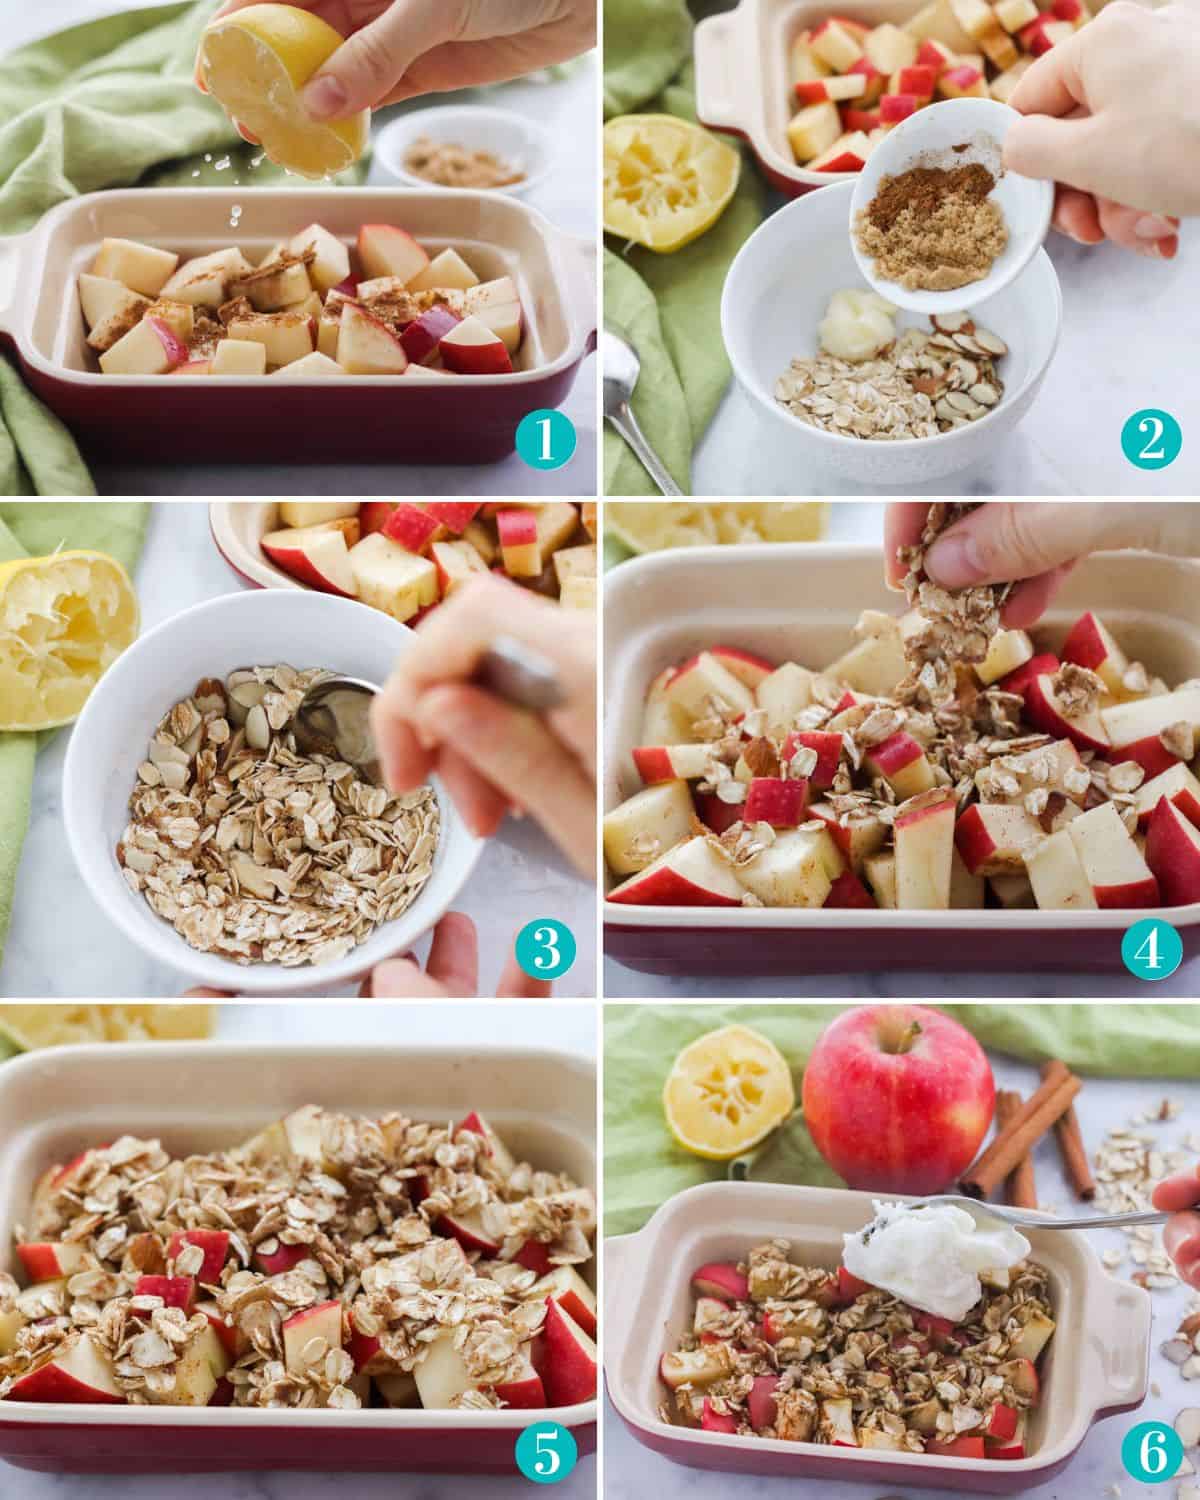 collage of six photos with lemon being squeezed over apples; hand adding a small bowl of brown sugar and cinnamon to oats in a white bowl; hand stirring oats with cinnamon and brown sugar; hand sprinkling oats over apples; apples covered with oats in a small red baking dish; apples after microwaving in baking dish with spoon of ice cream going on top